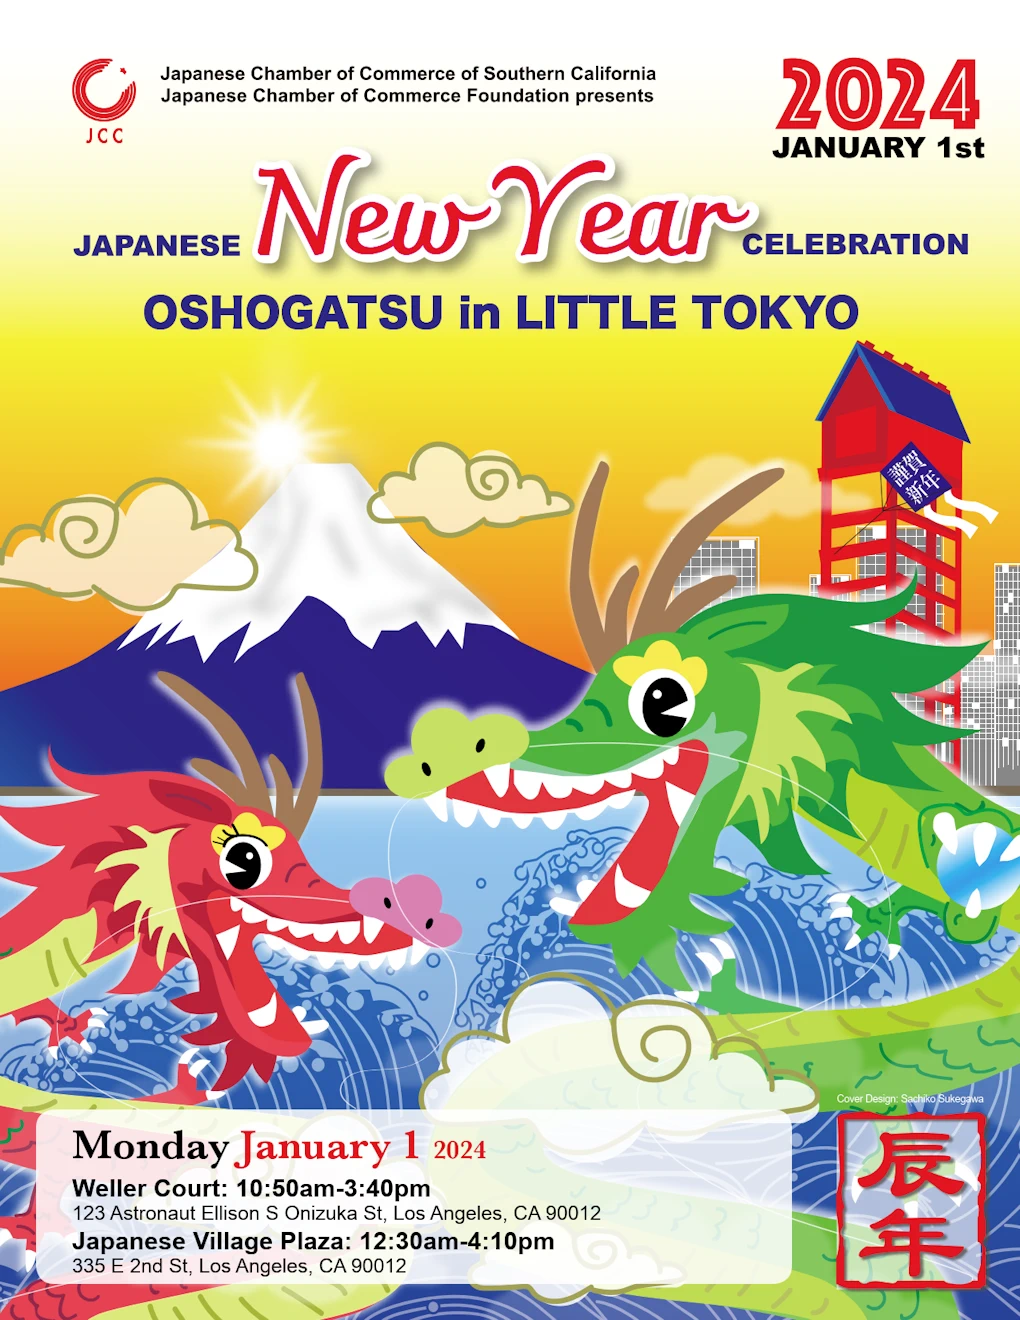 2024 - 25th Annual Japanese New Year's Oshogatsu Festival Event - Little Tokyo (2 Locations - Jan 1st, 2023) Entertainment - Updated Schedule!        